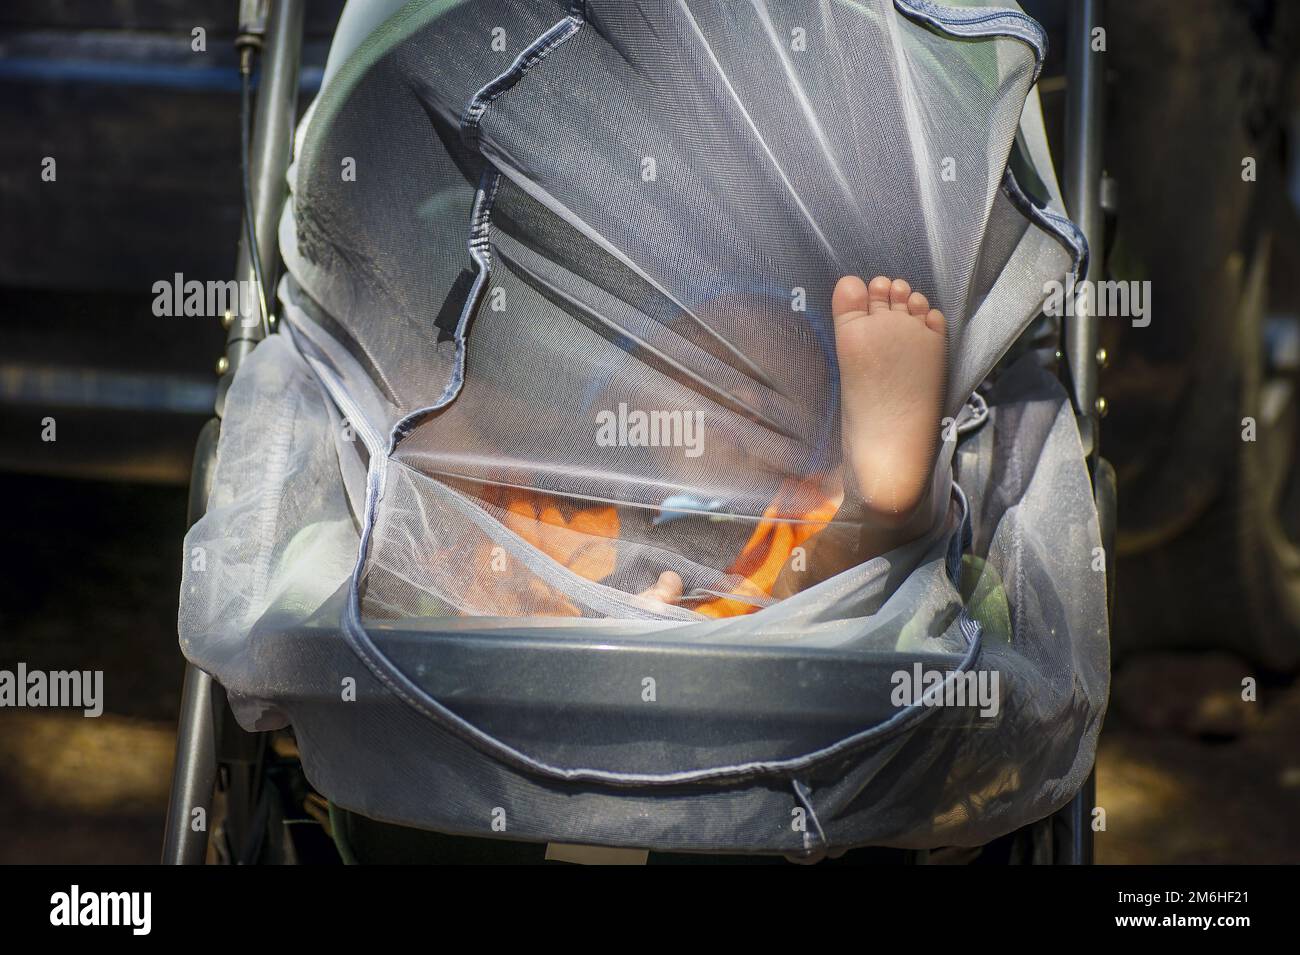 The baby's foot rested against the mosquito net on the stroller. Stock Photo